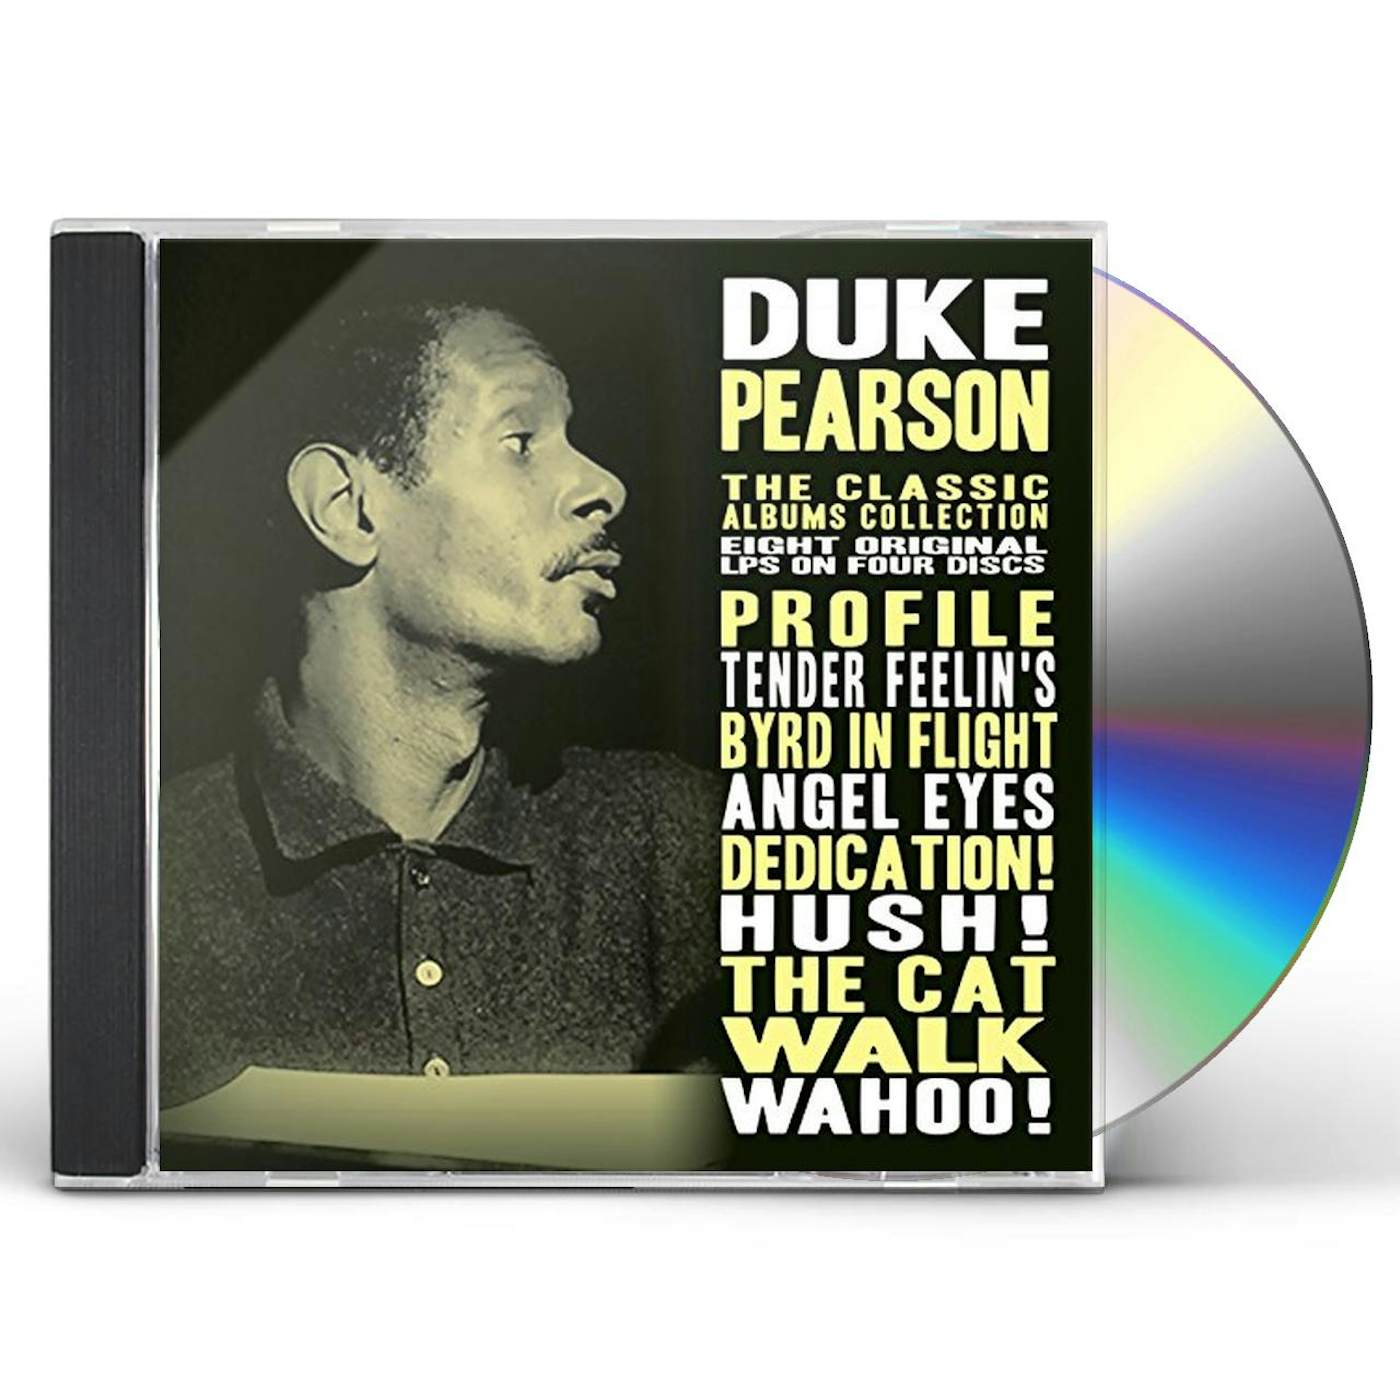 Duke Pearson CLASSIC ALBUMS COLLECTION CD